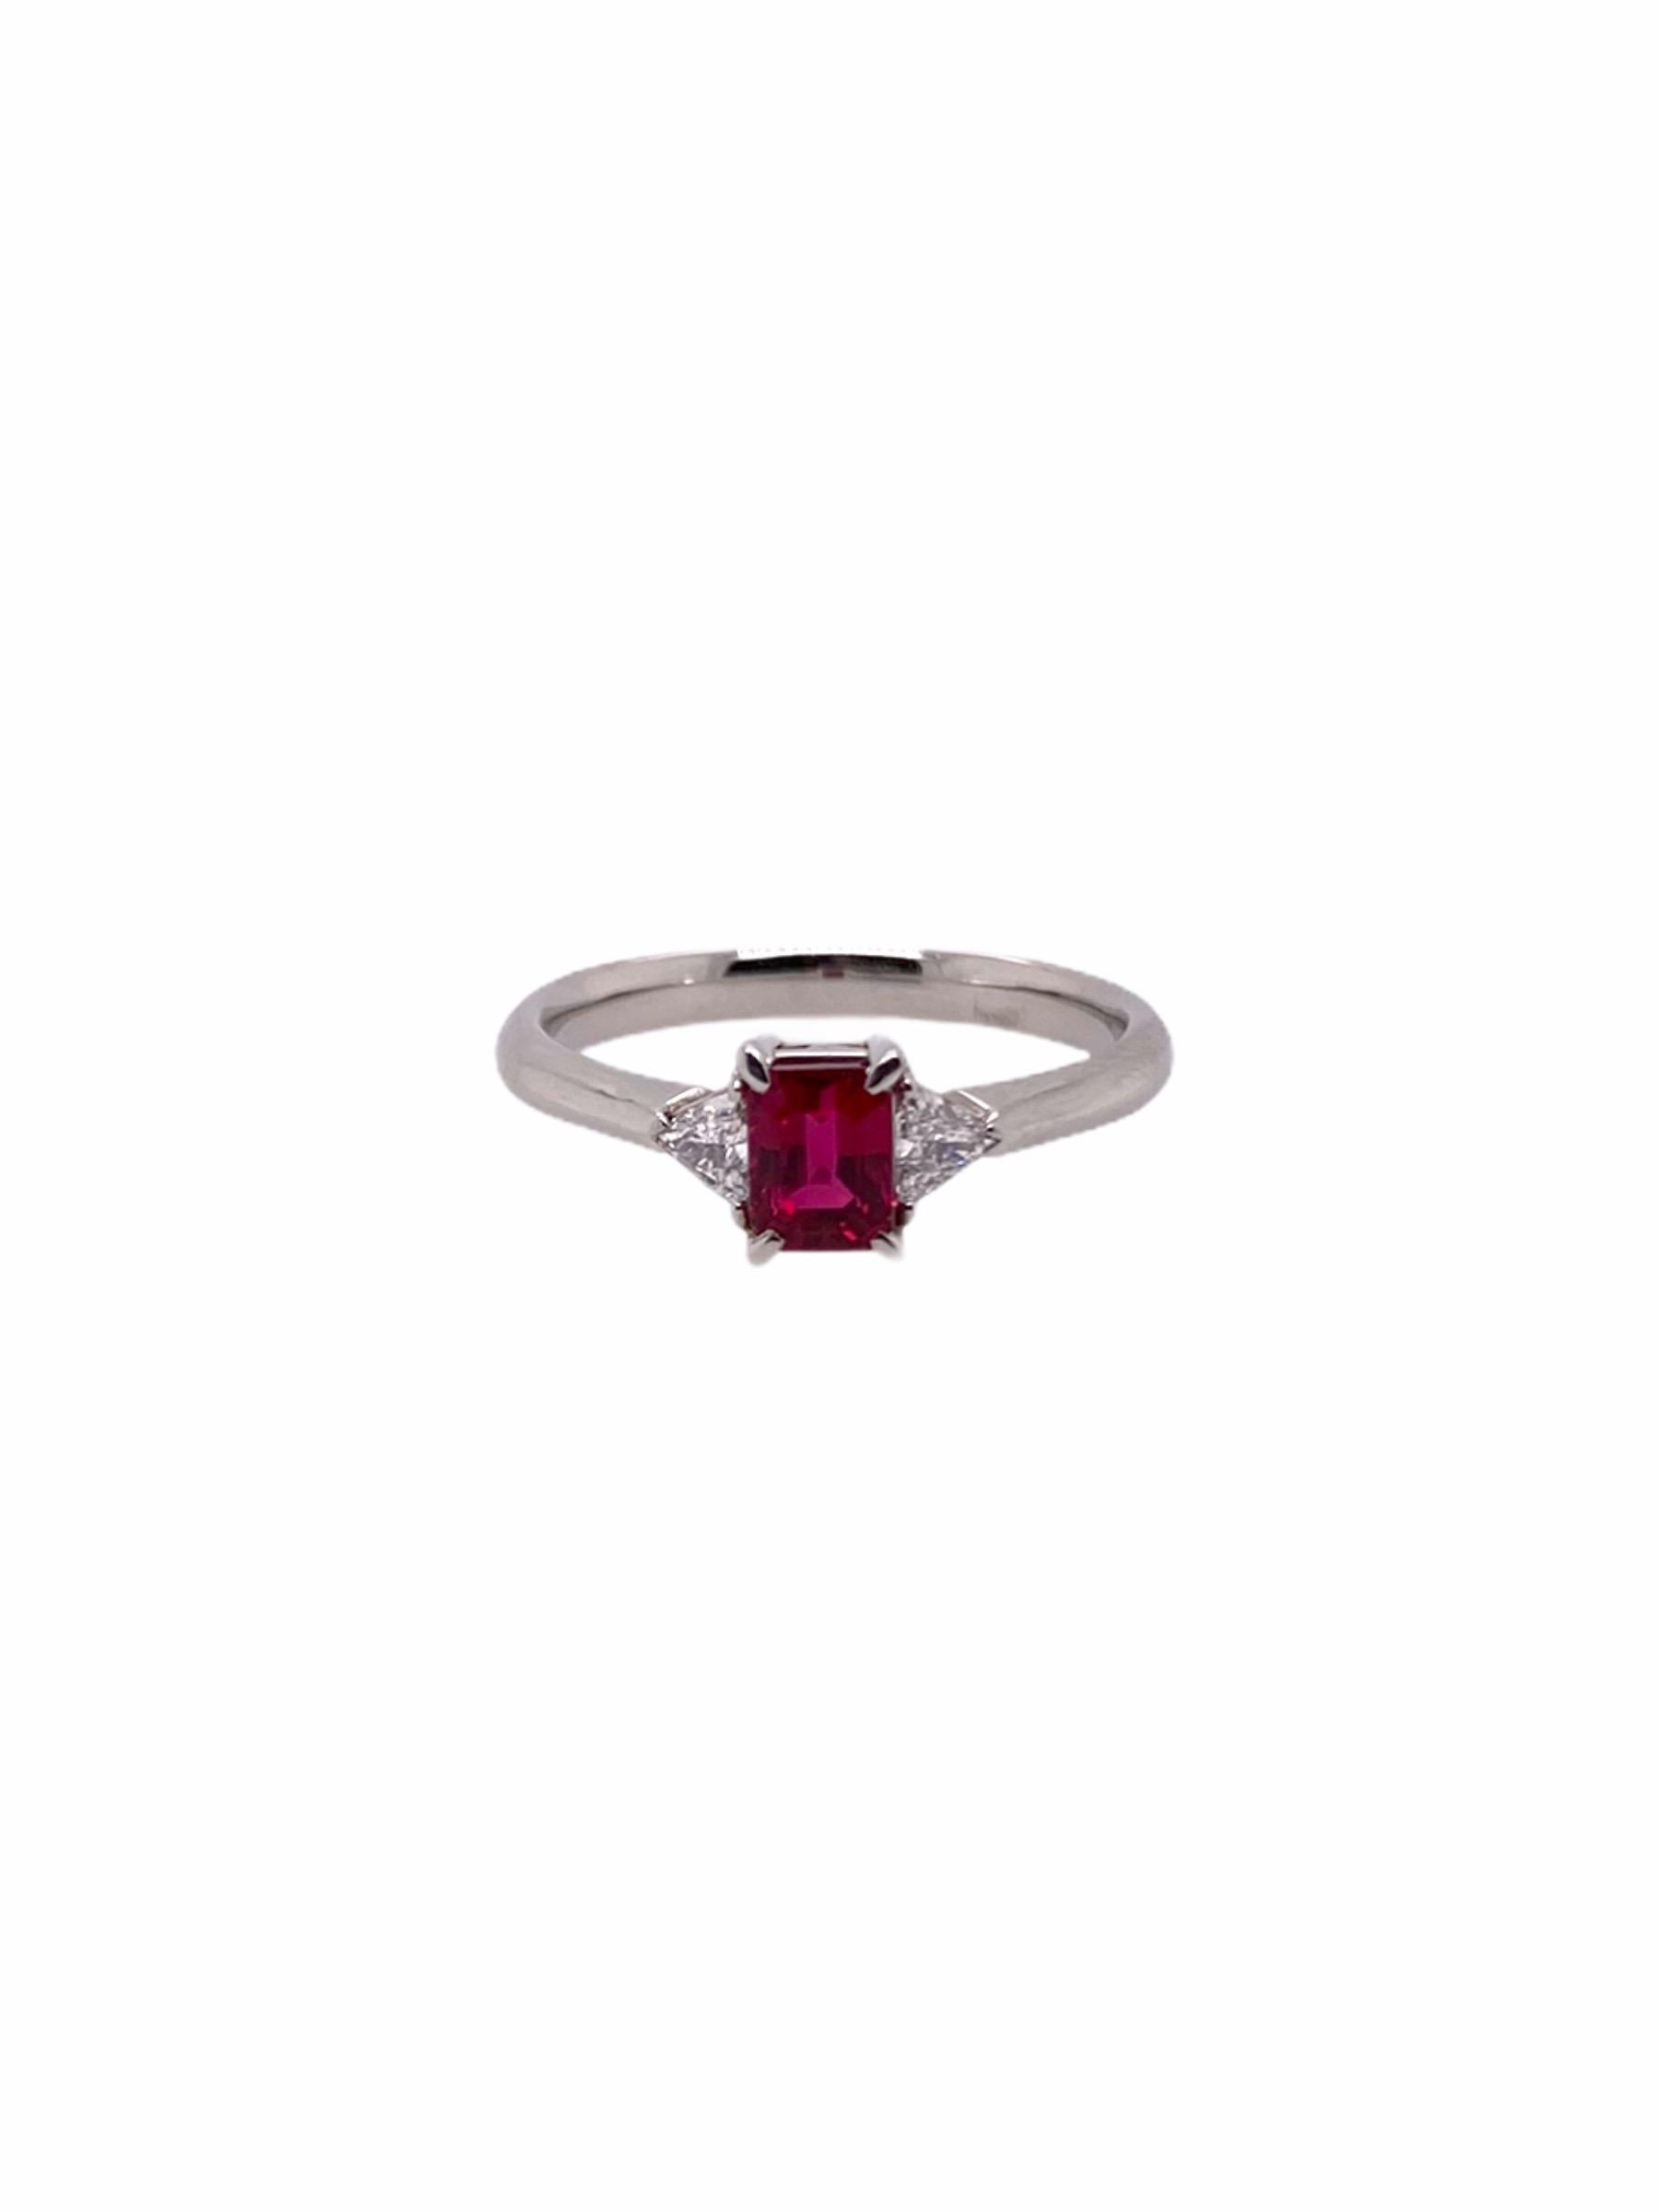 PARIS Craft House one-of-one Ruby Diamond Solitaire Ring. It's center piece is of a GIA Certified 1.01ct Burmese Ruby. Prized for their beauty, durability, and rarity, it is the quality of the color which most determines the value of rubies. Burma